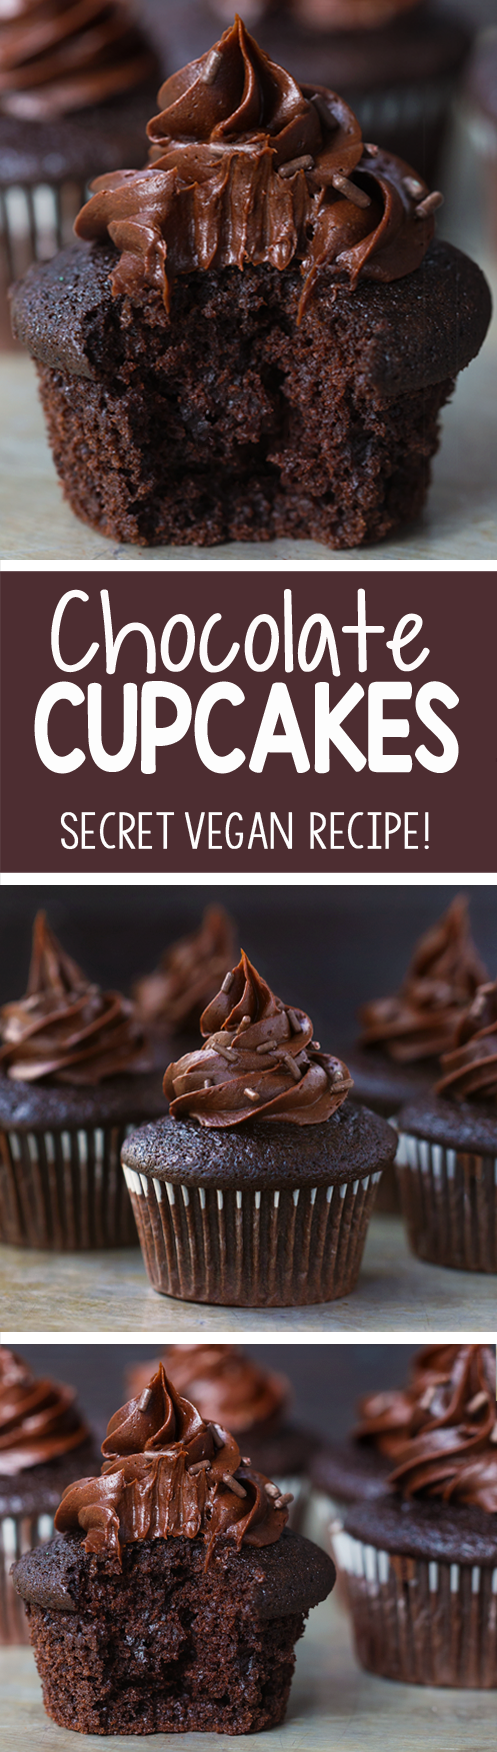 How To Make The Best Vegan Chocolate Cupcakes